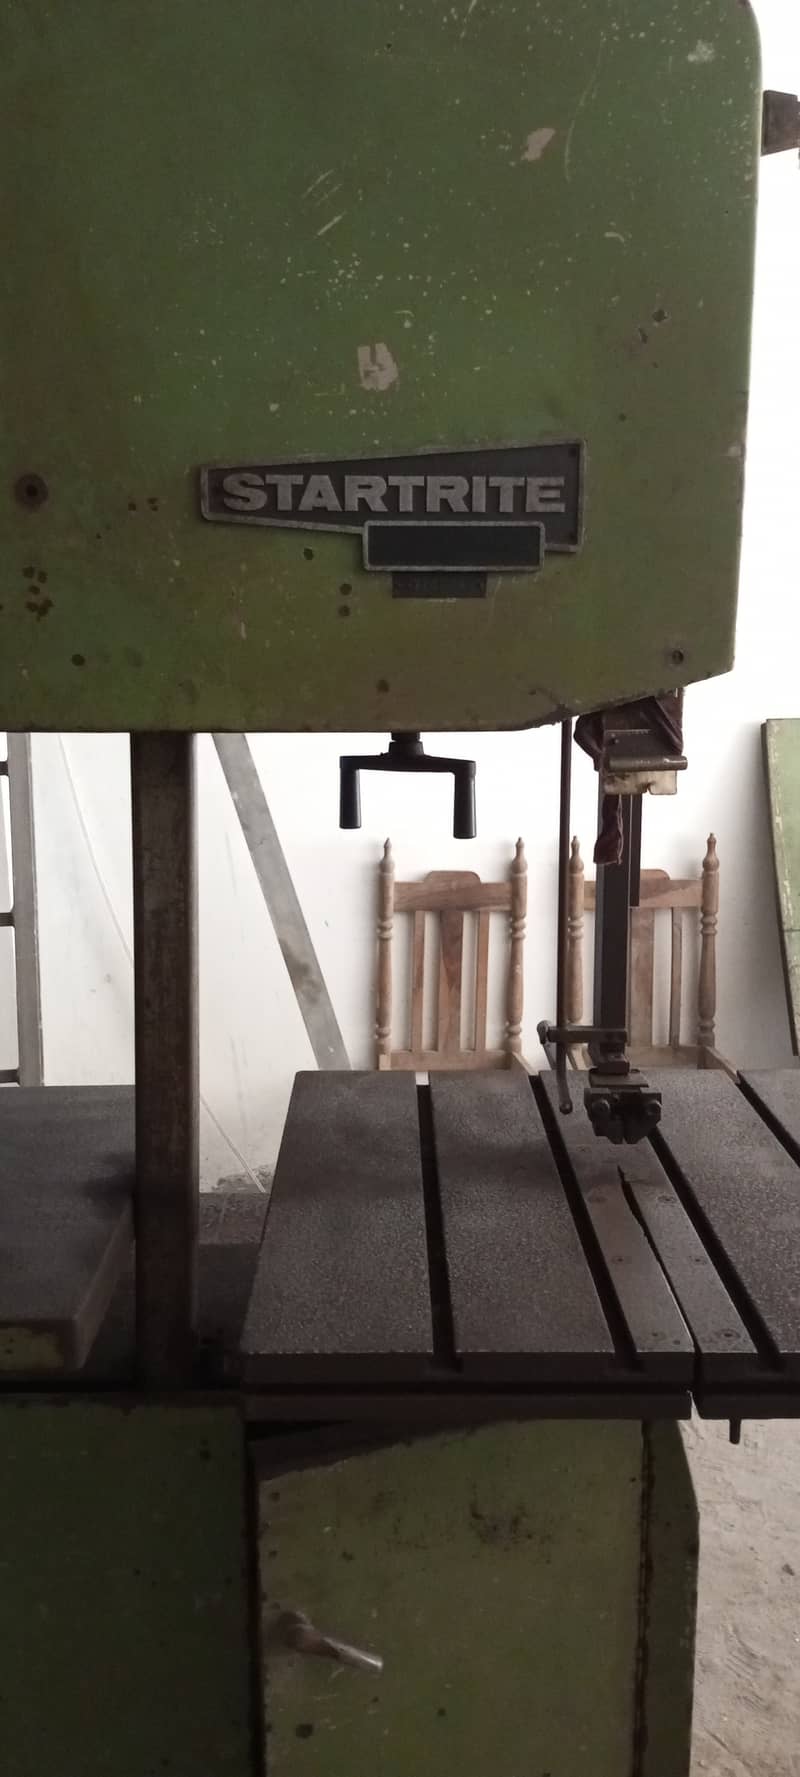 Used and super old wood cutting machines for sale 8